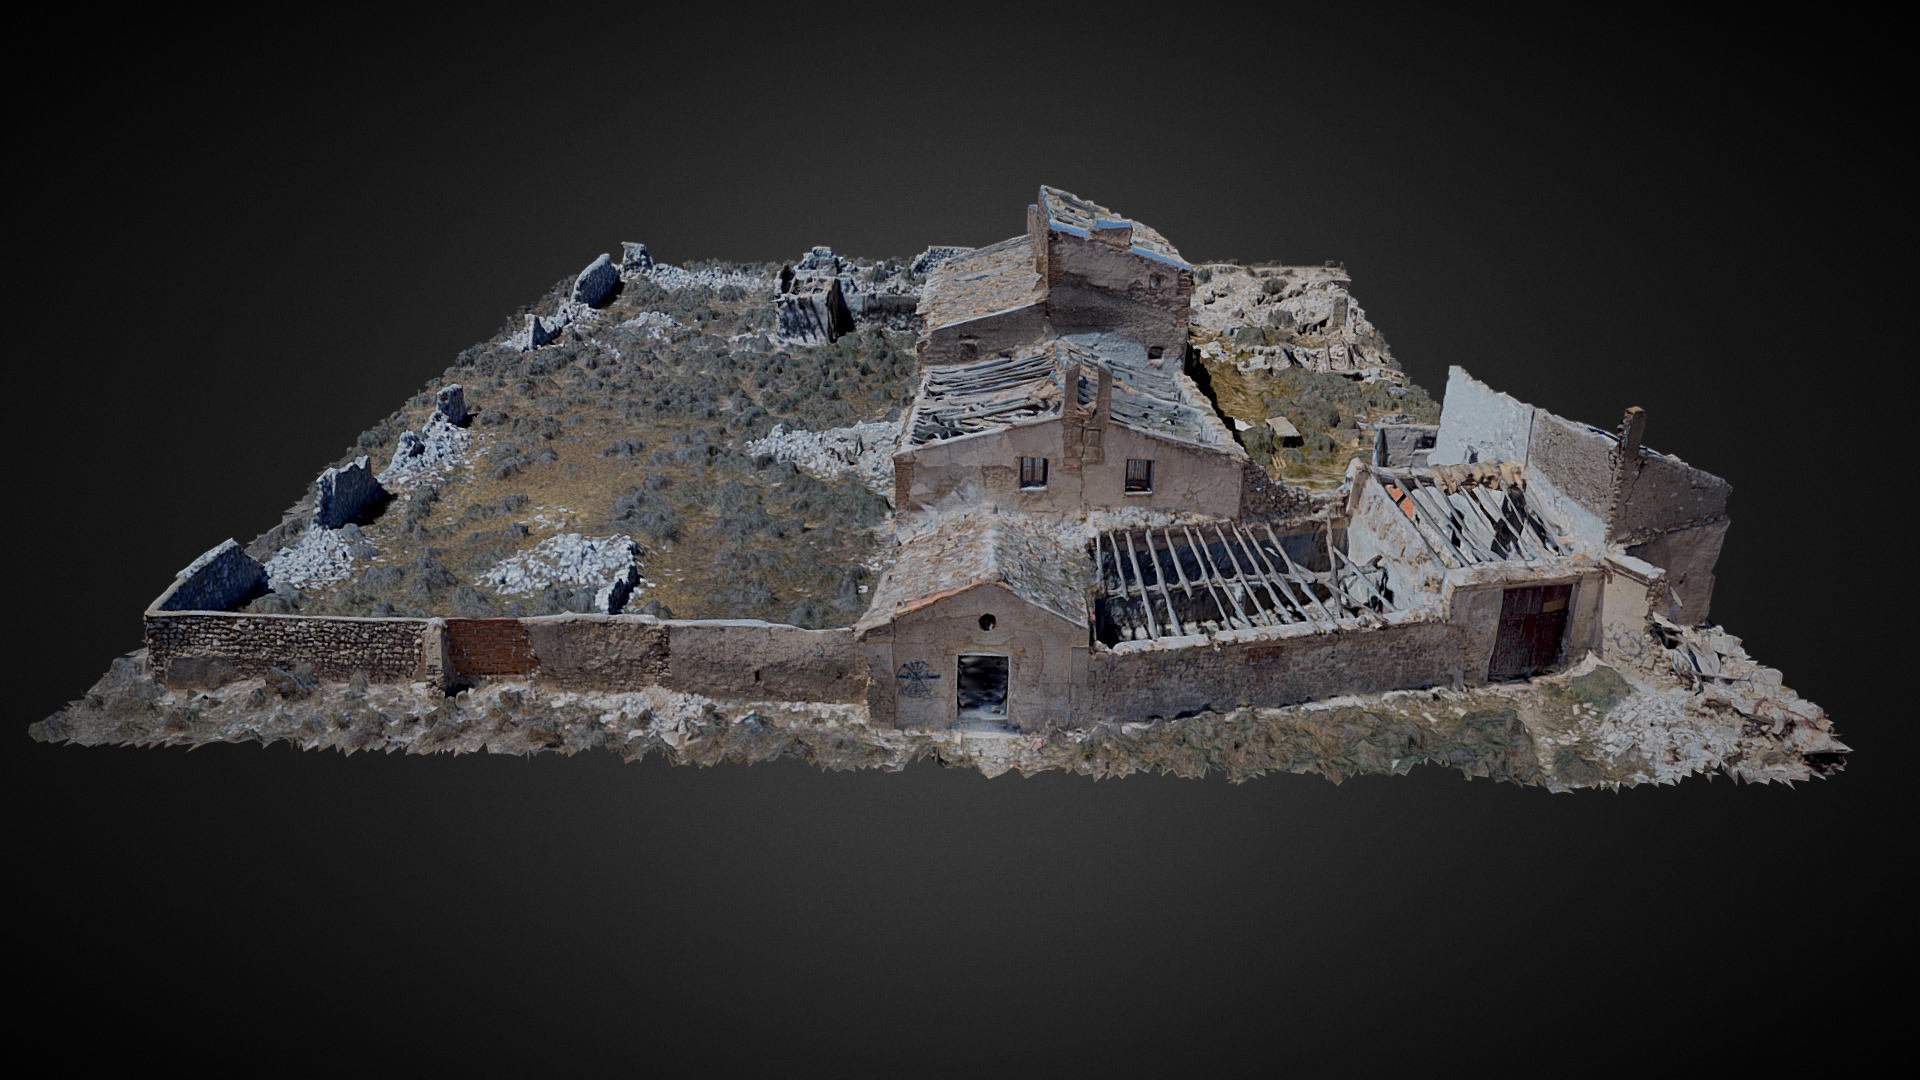 3D model Ruinas A-222 - This is a 3D model of the Ruinas A-222. The 3D model is about a stone castle on a black background.